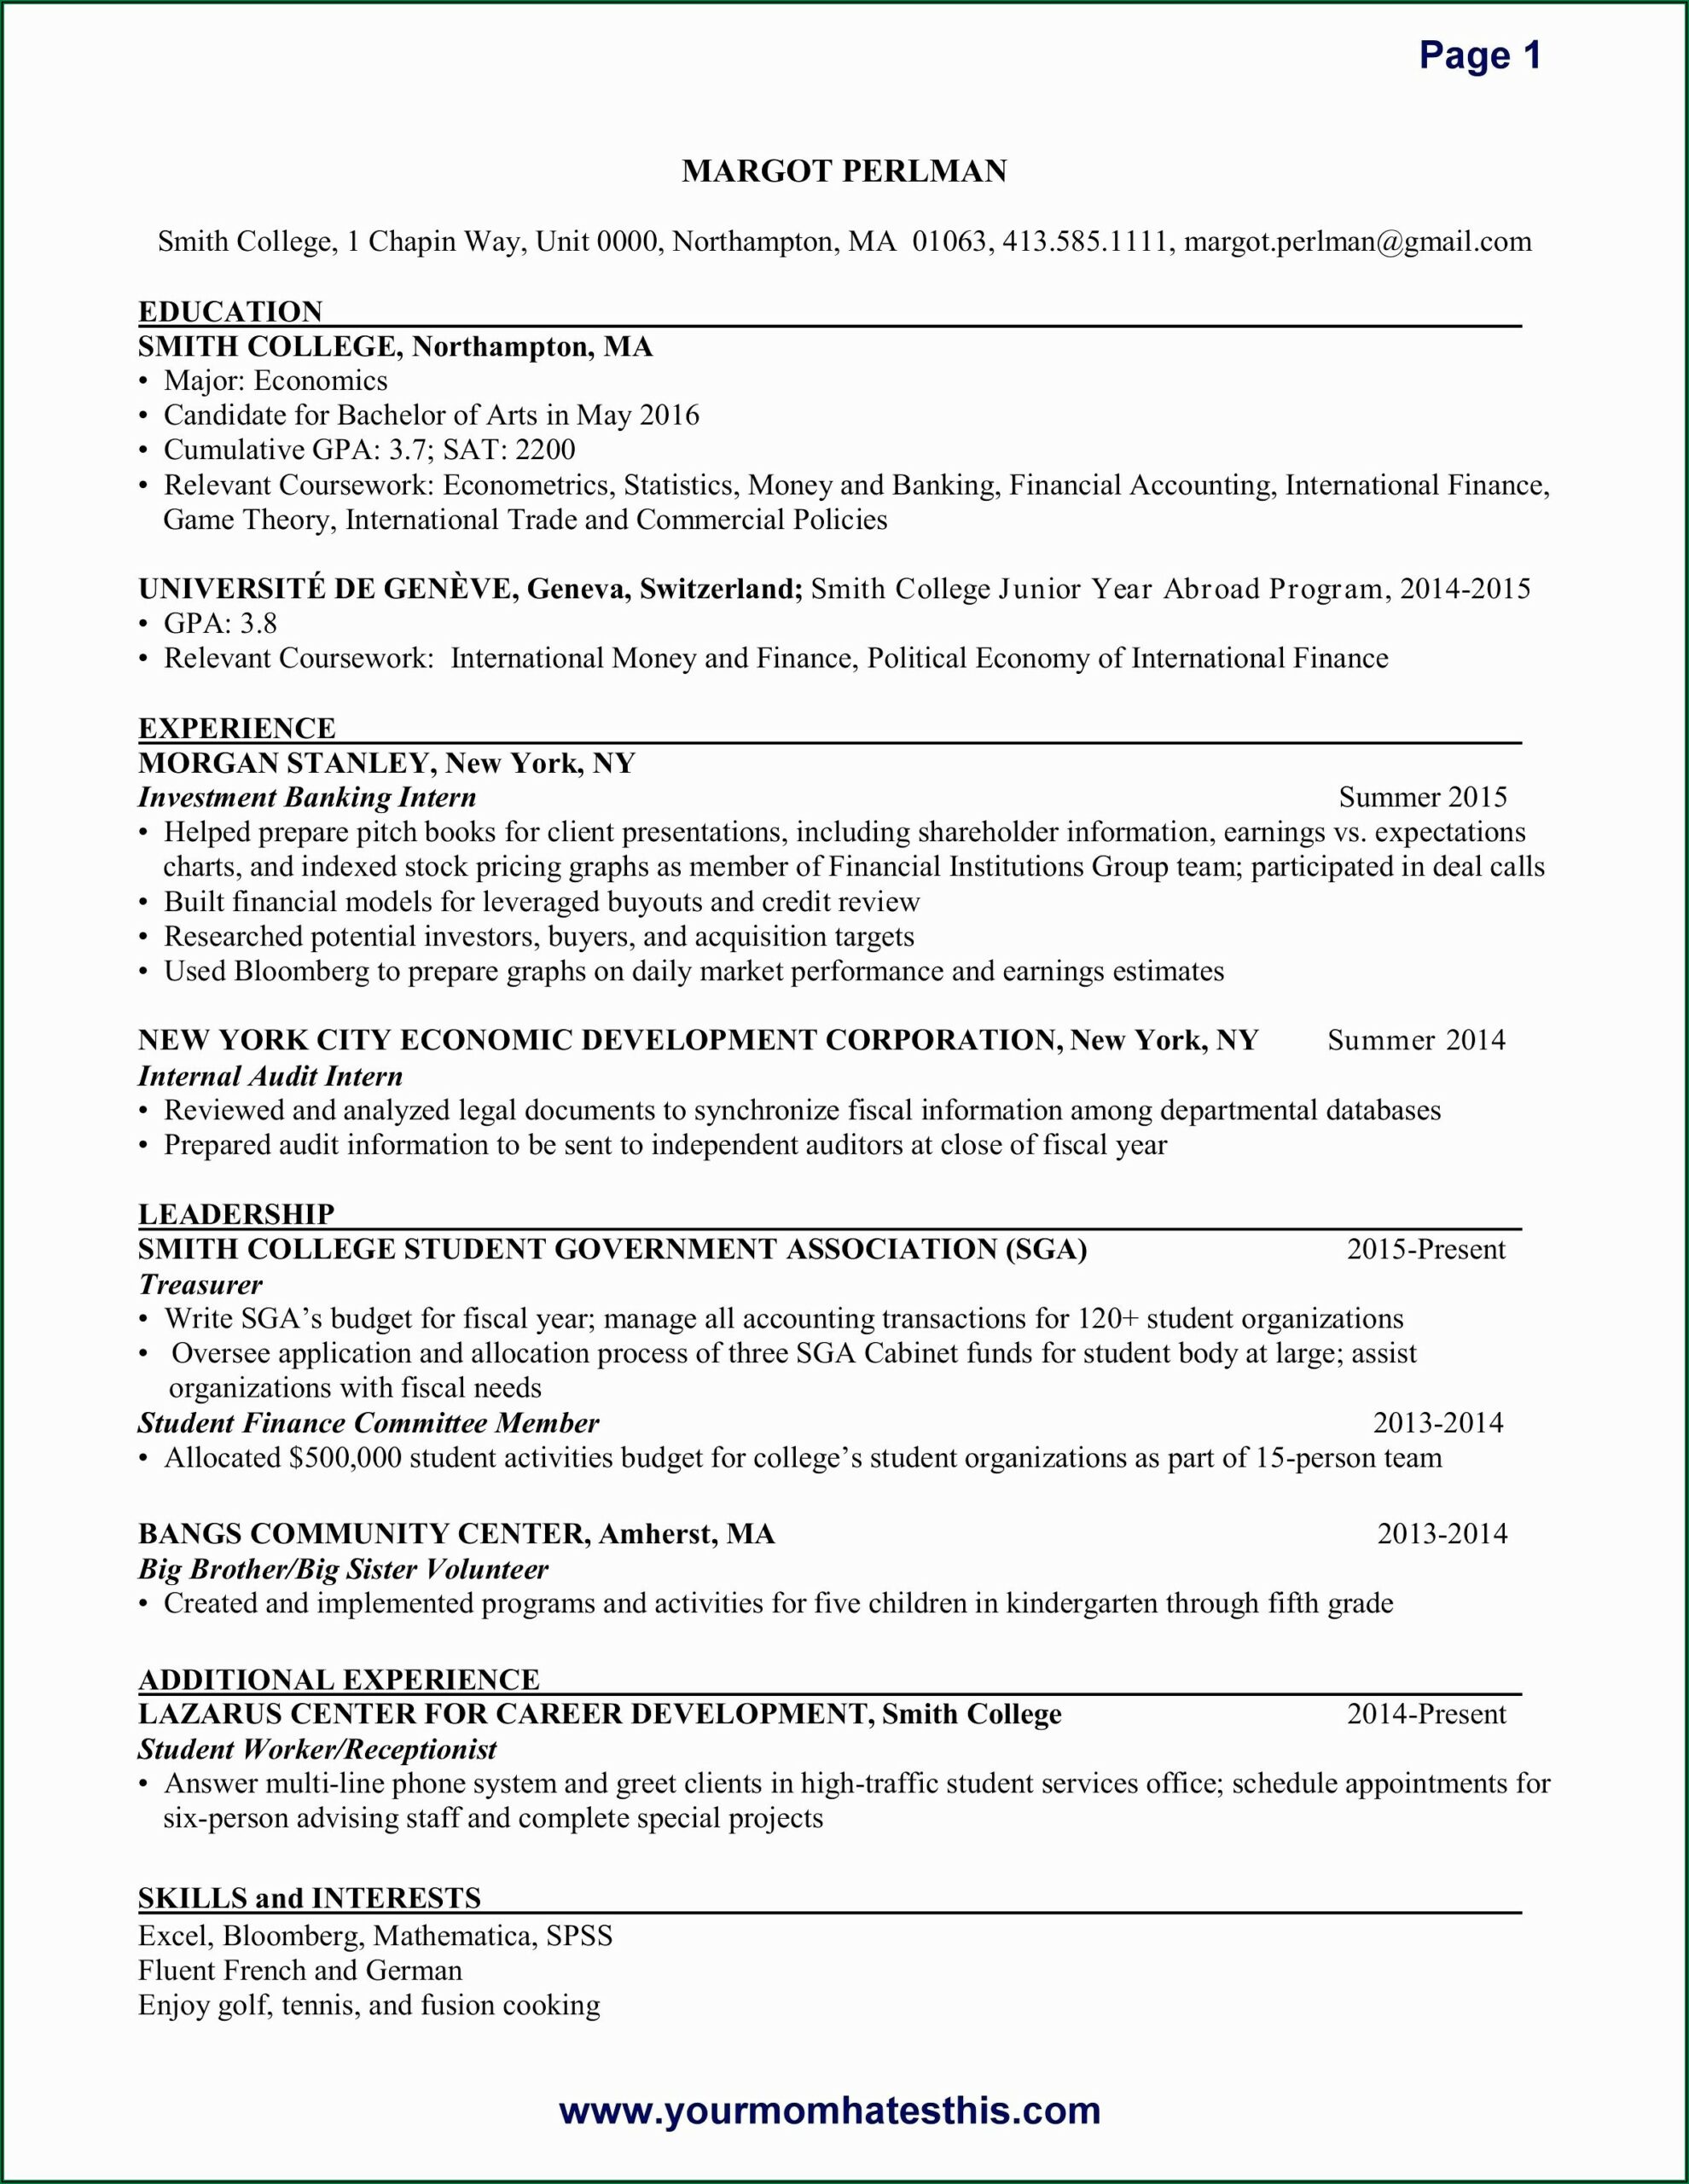 Youth Ministry Resume Examples